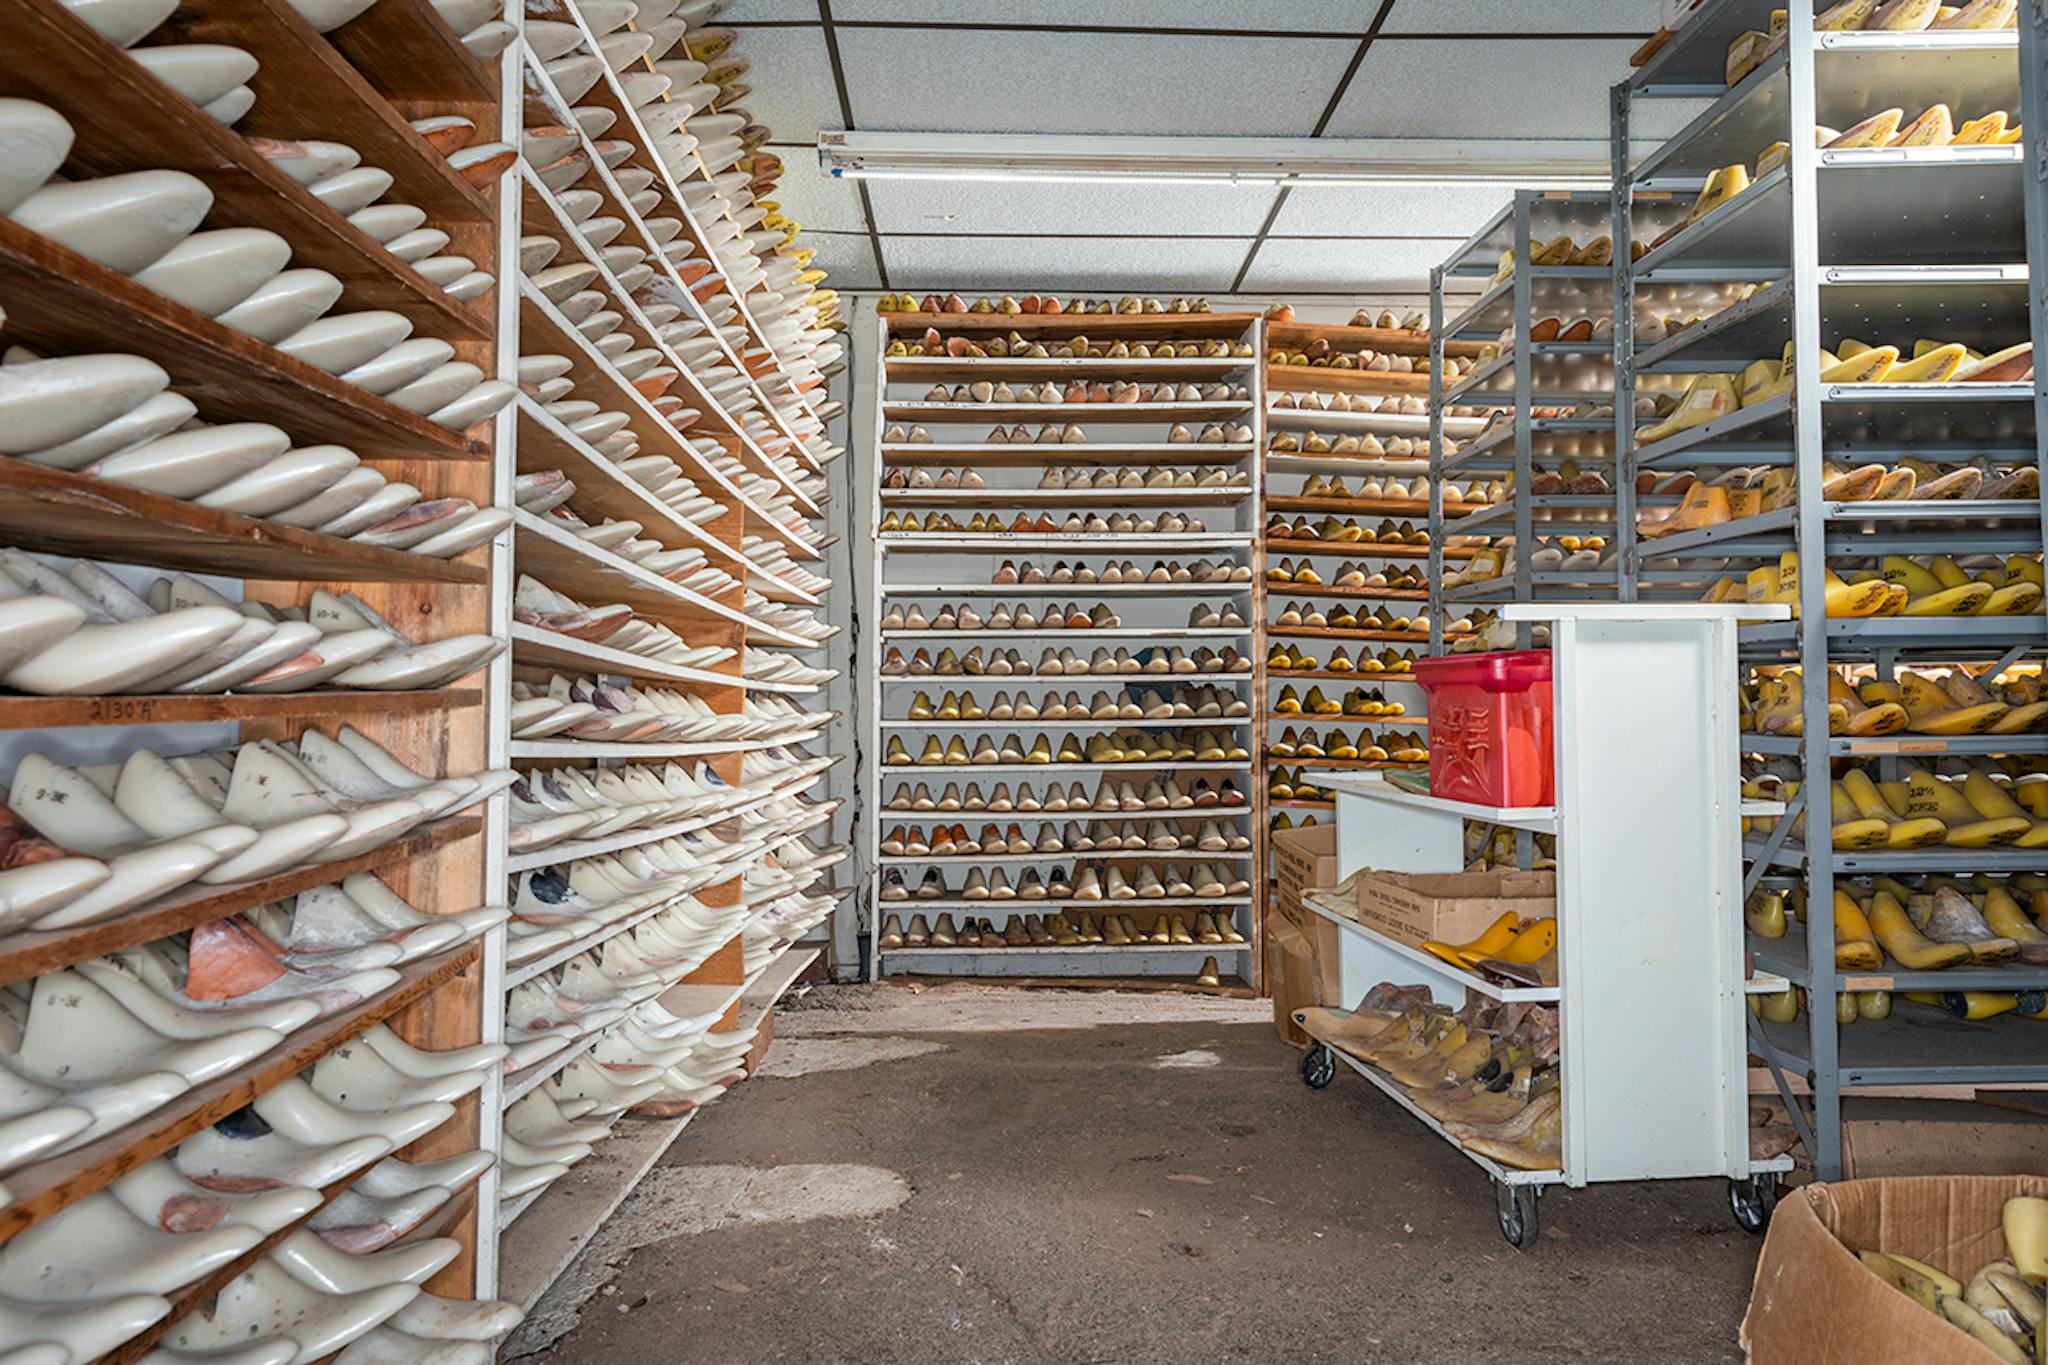 The last room, where the customized forms belonging to hundreds of individual Little’s customers are stored for future use.